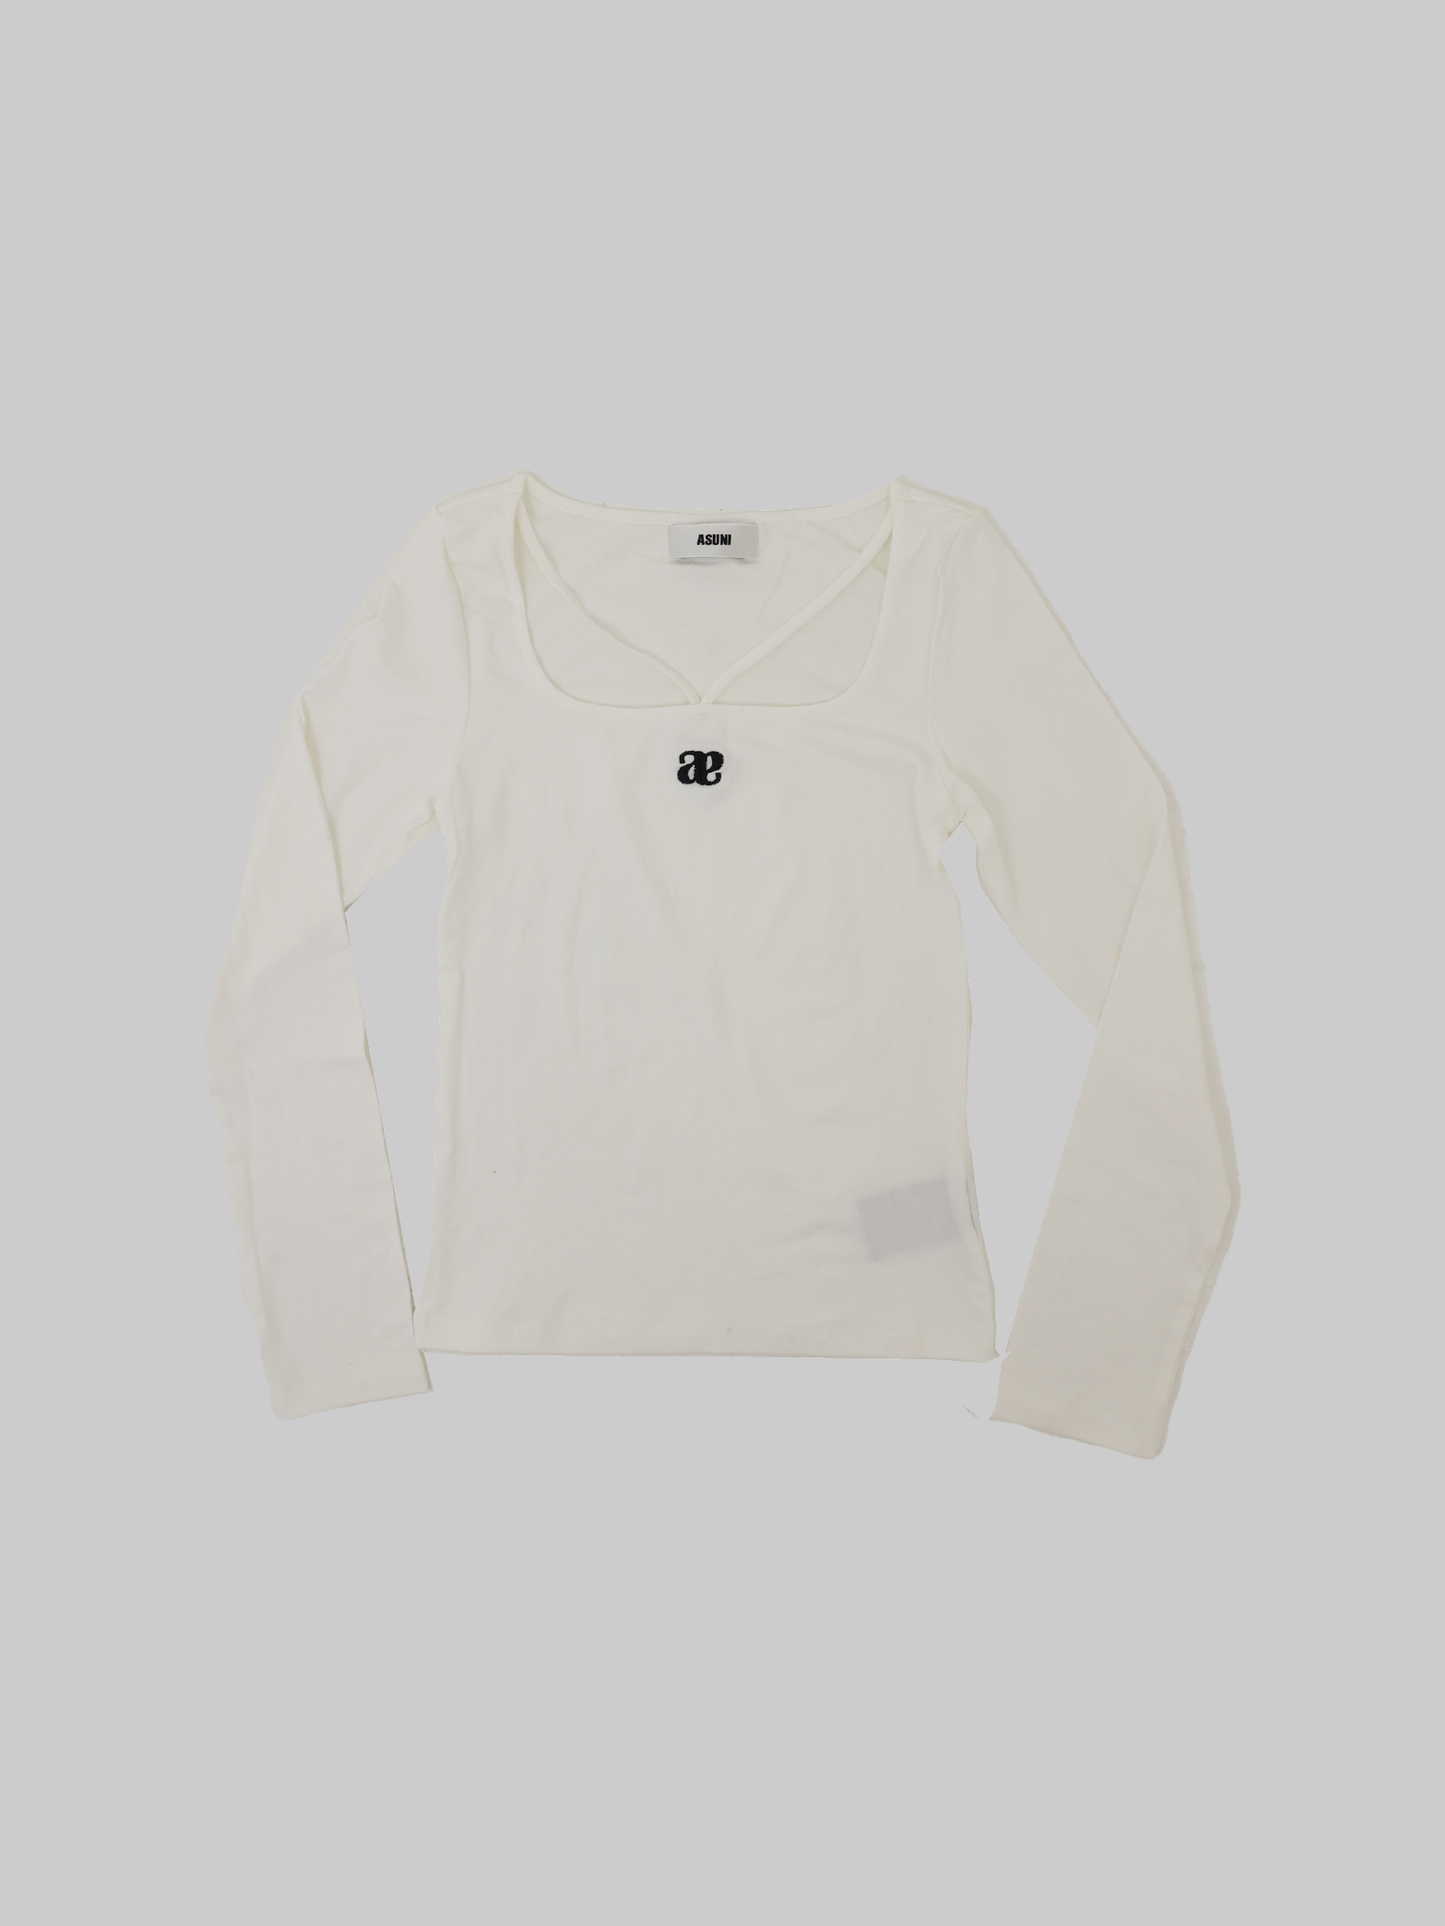 Double A long sleeve top in white